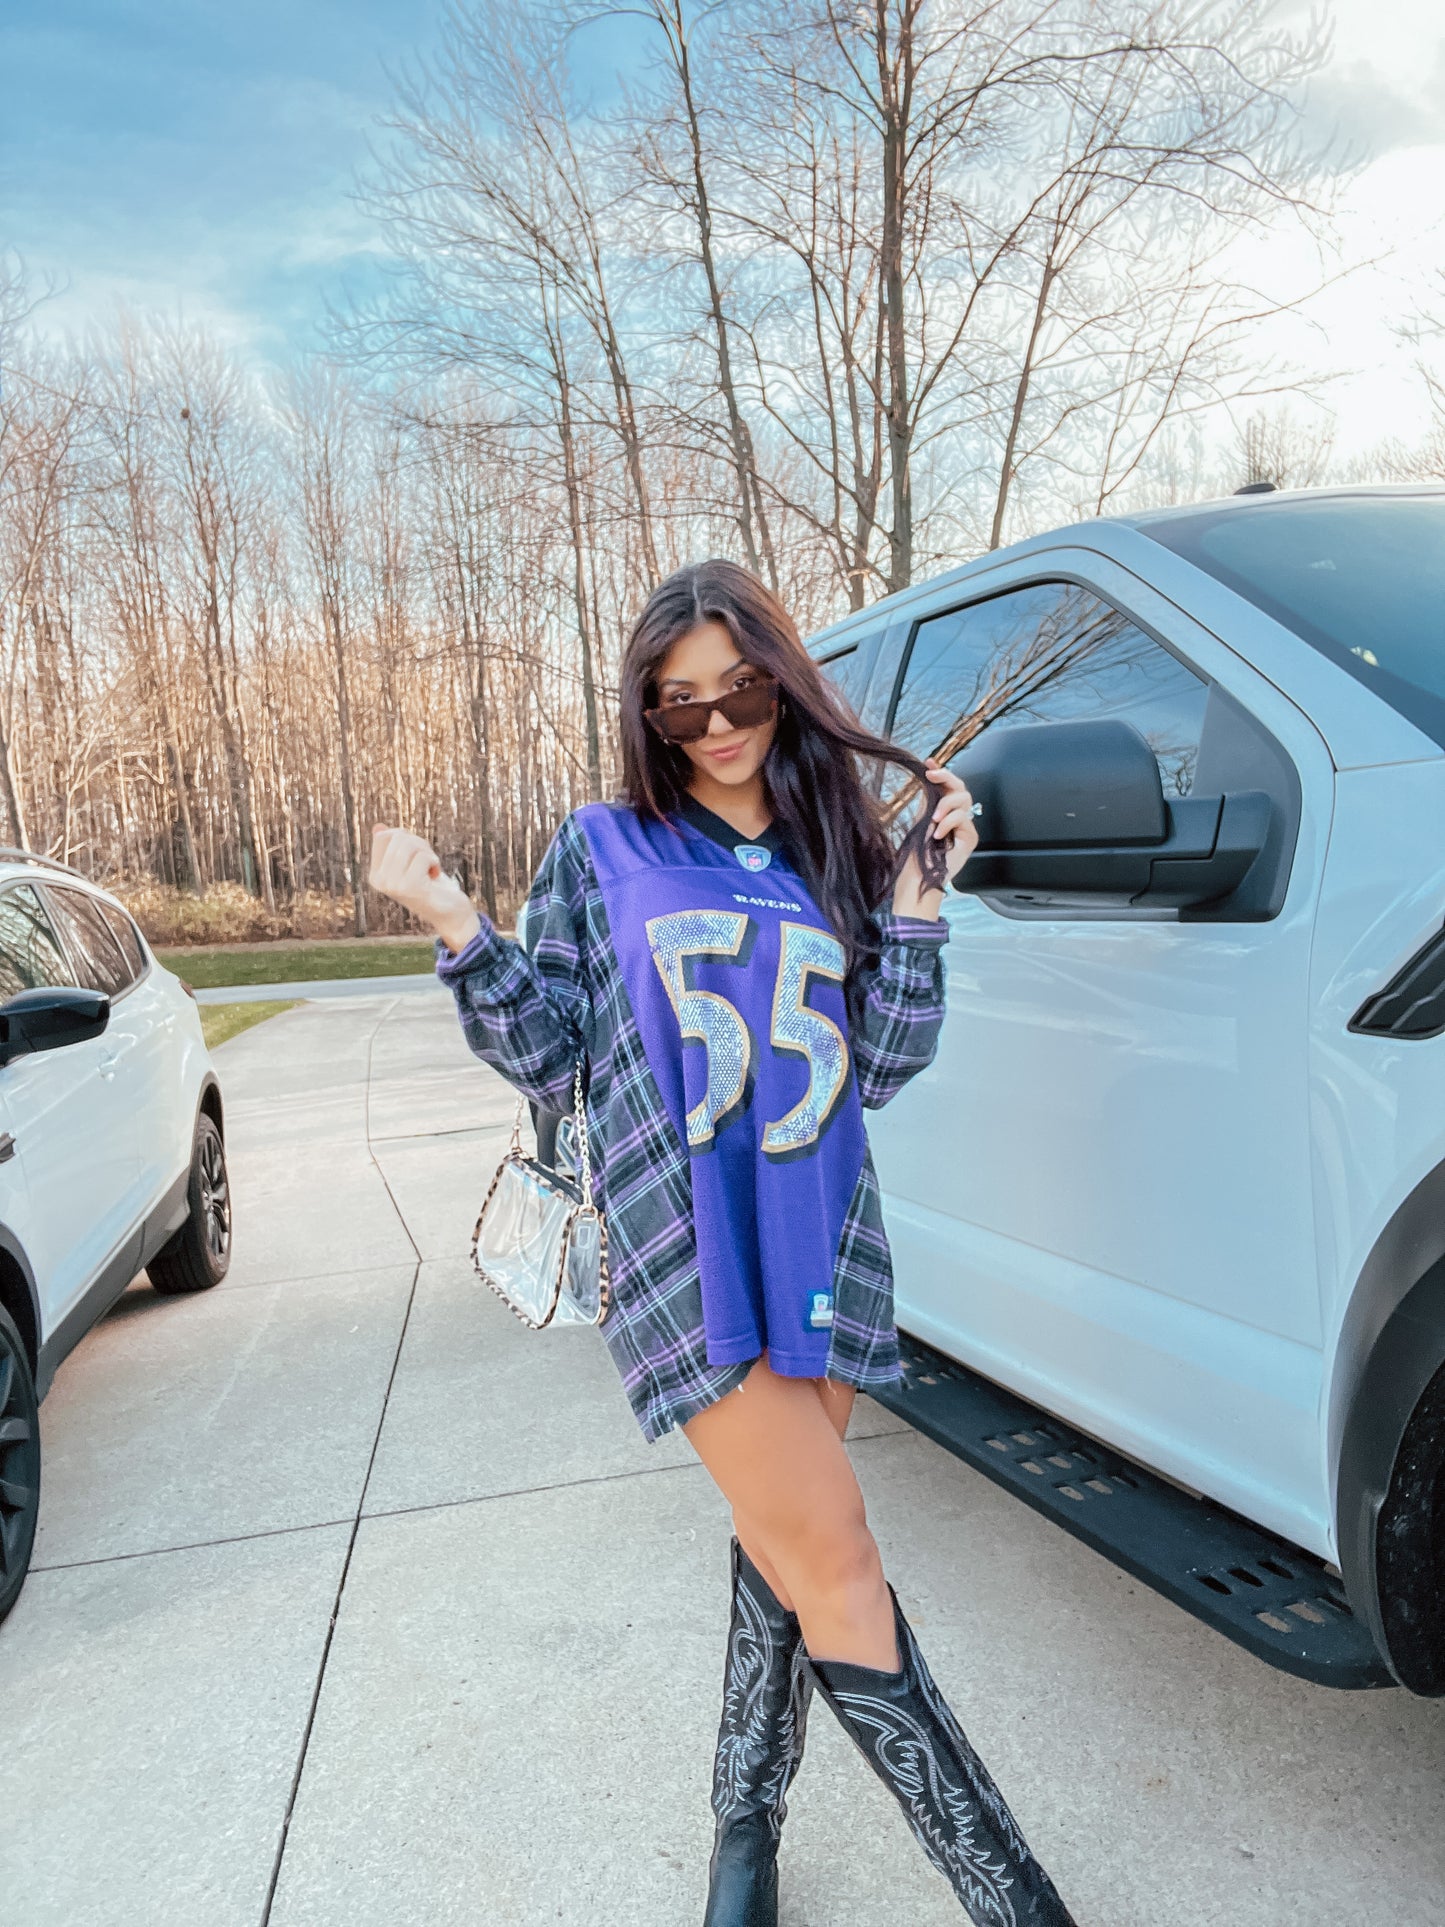 #55 SUGGS BALTIMORE JERSEY X FLANNEL